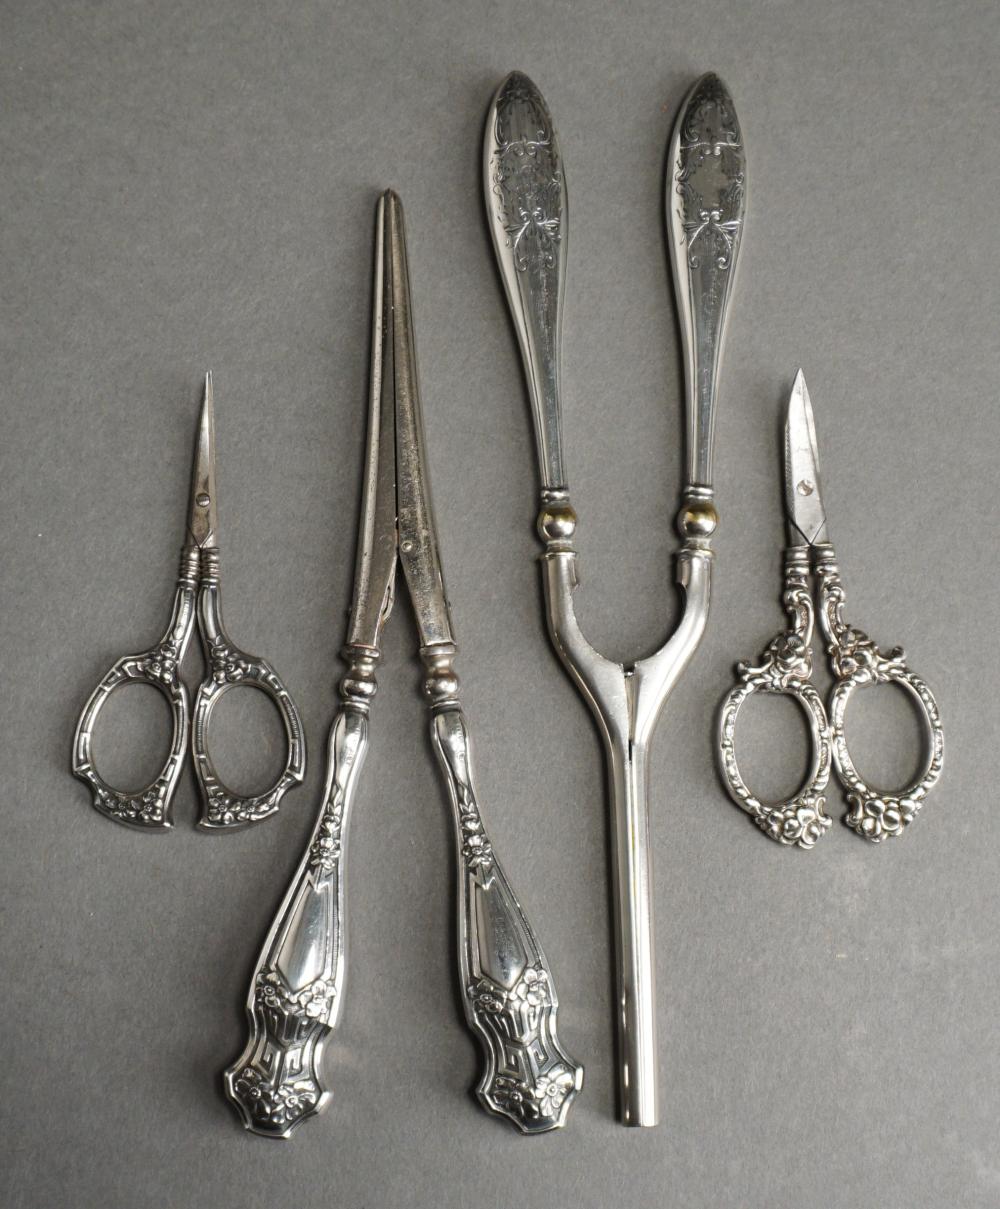 TWO STERLING SILVER HANDLE SCISSORS